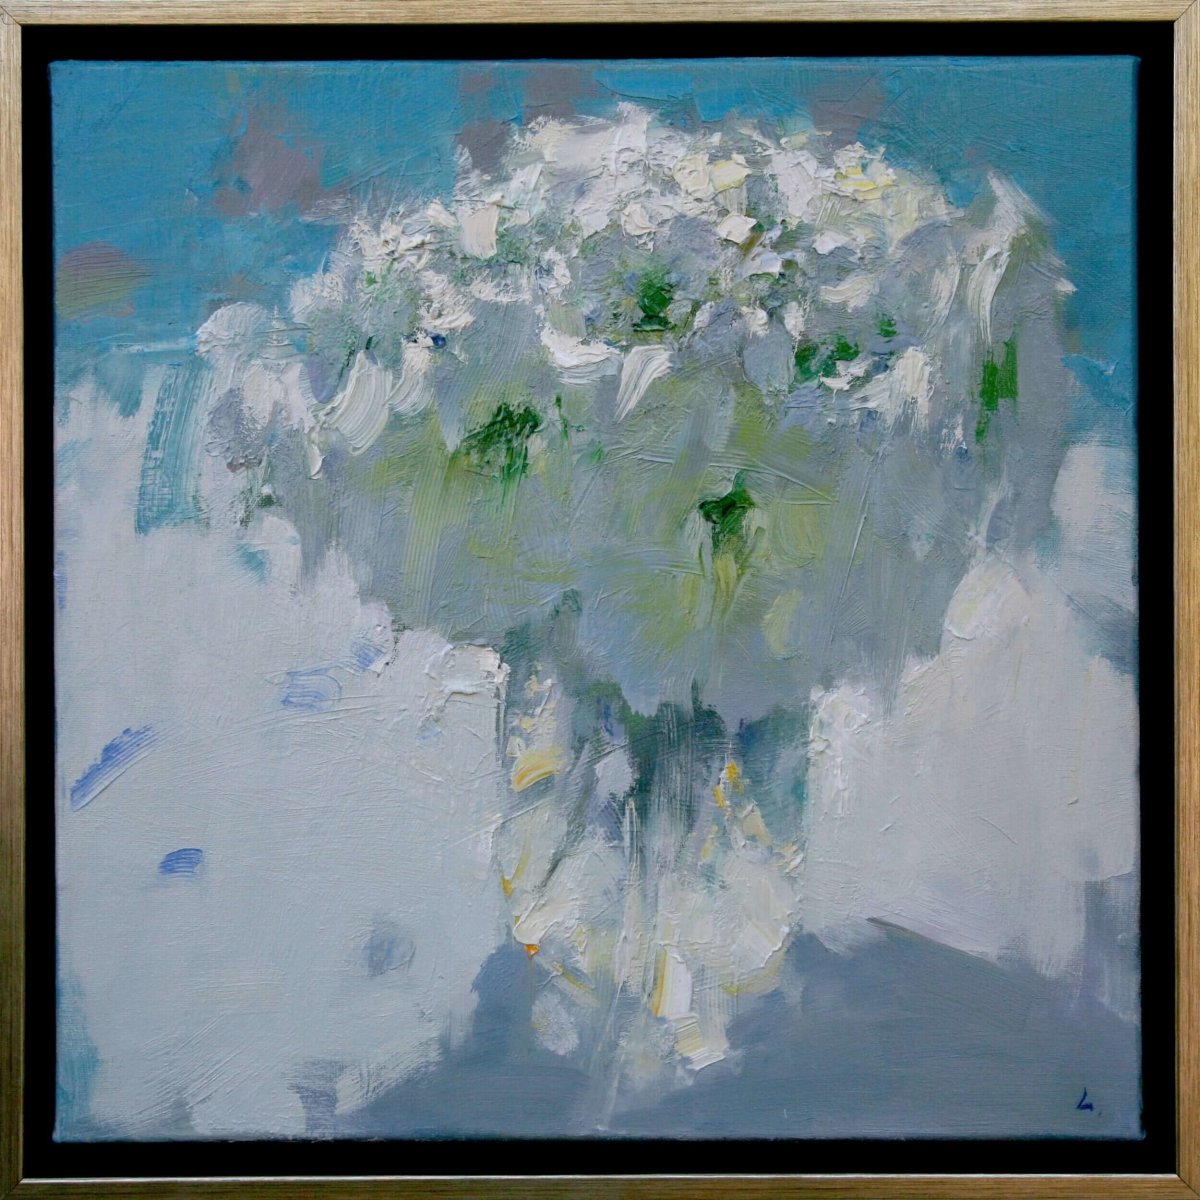 White by Ning Lee at LePrince Galleries